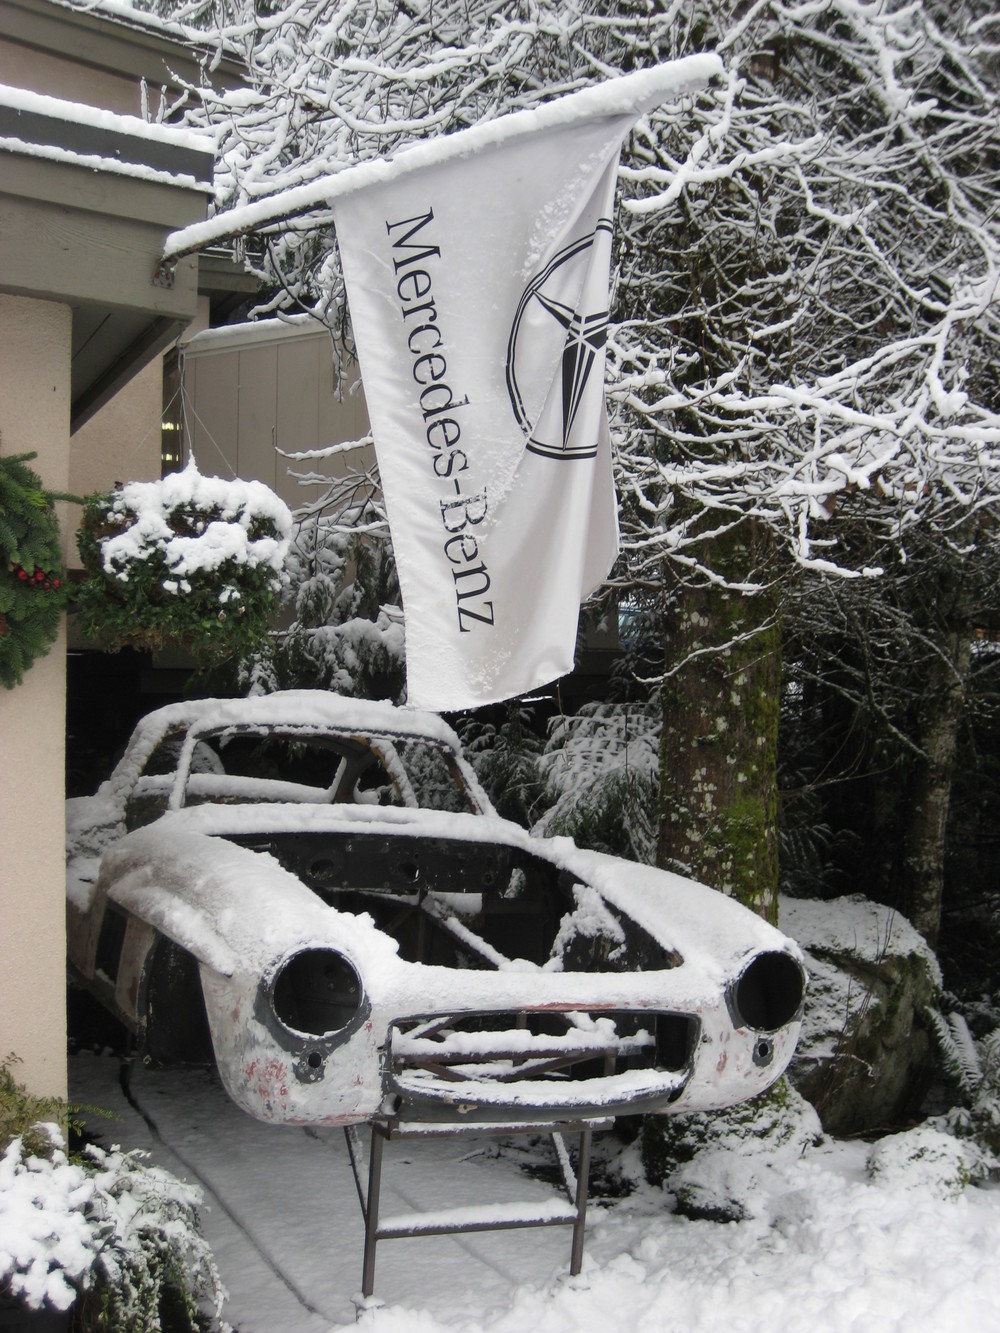 Alloy Gullwing body in the snow (old photo)